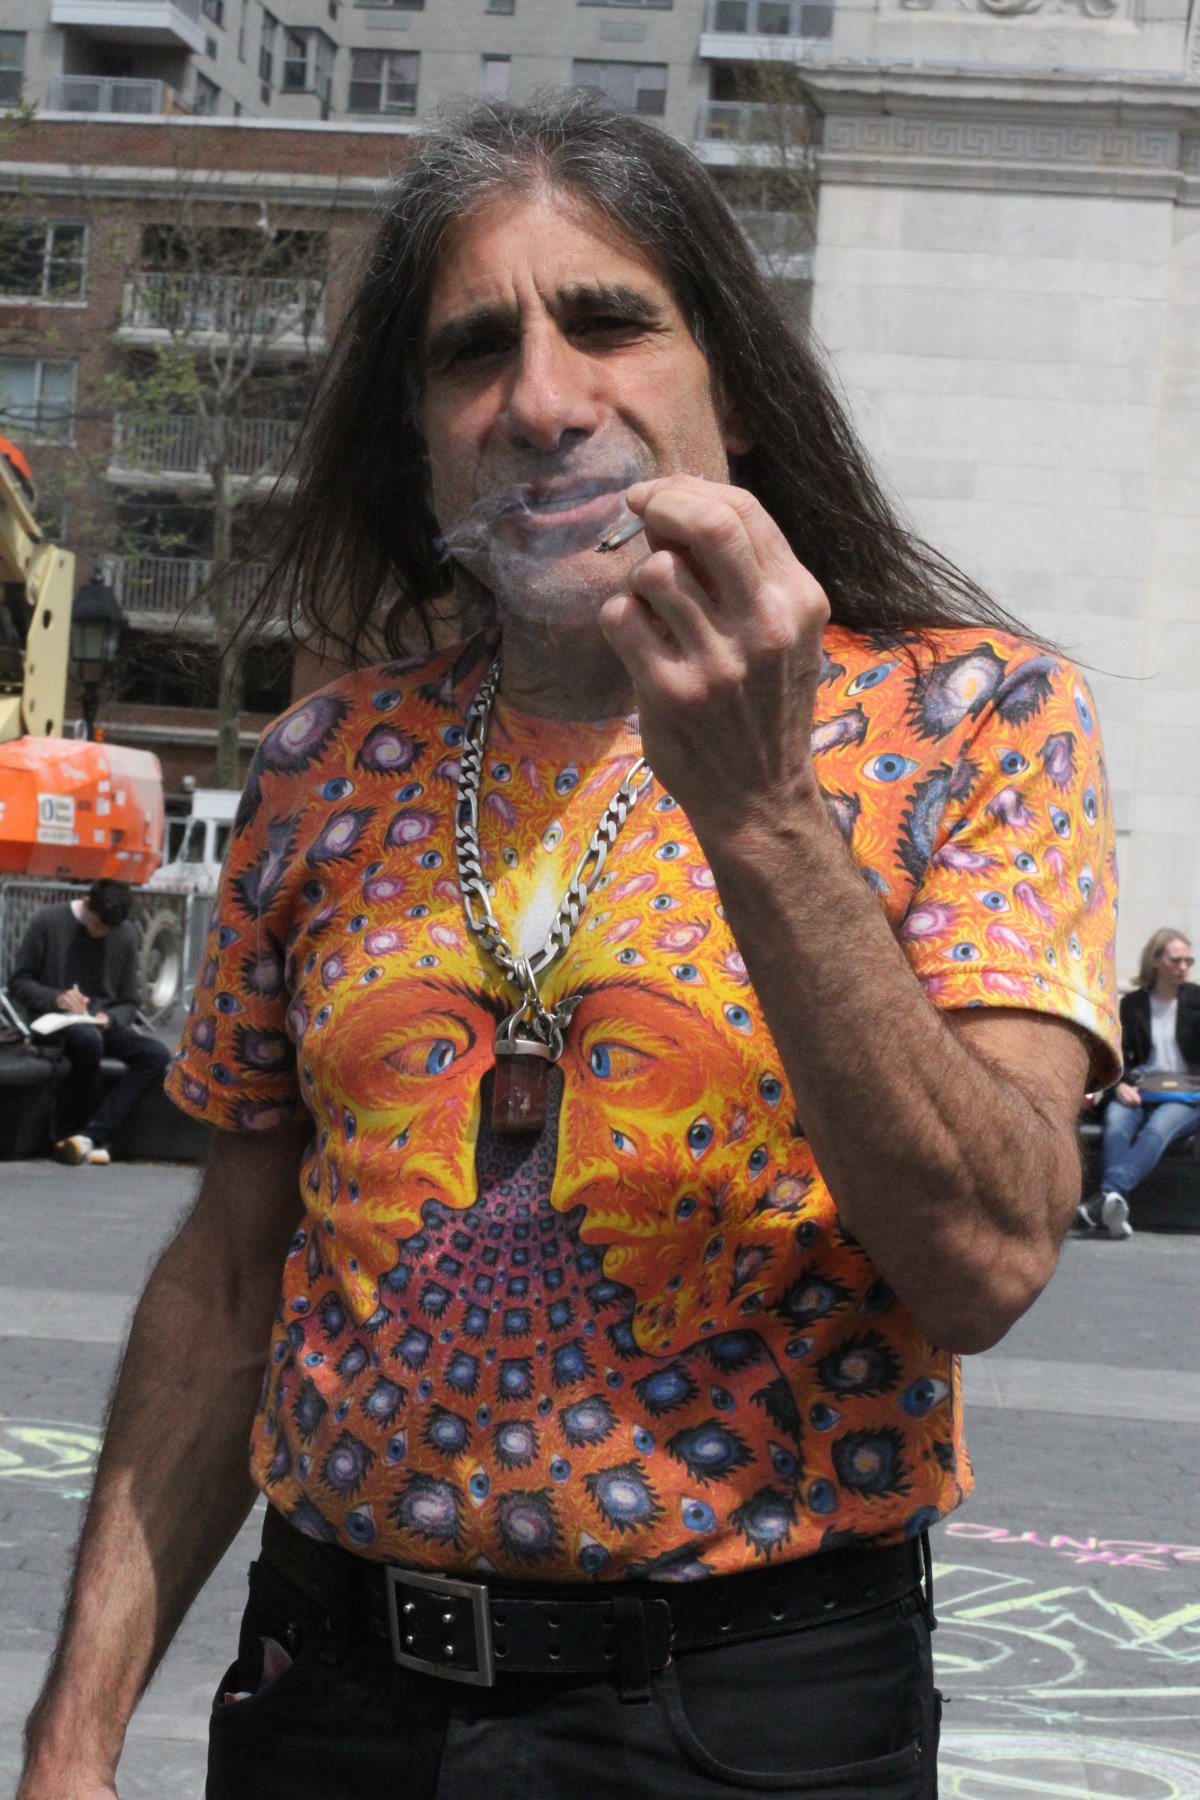 A pot advocate marking the annual “420 Day” in Washington Square Park on April 20, 2015. According to lore, the number marks the time — 4:20 p.m. — when a group of 1970s high school students would light up to celebrate the end of the school day right before their band’s practice session. Photo by Paul DeRienzo